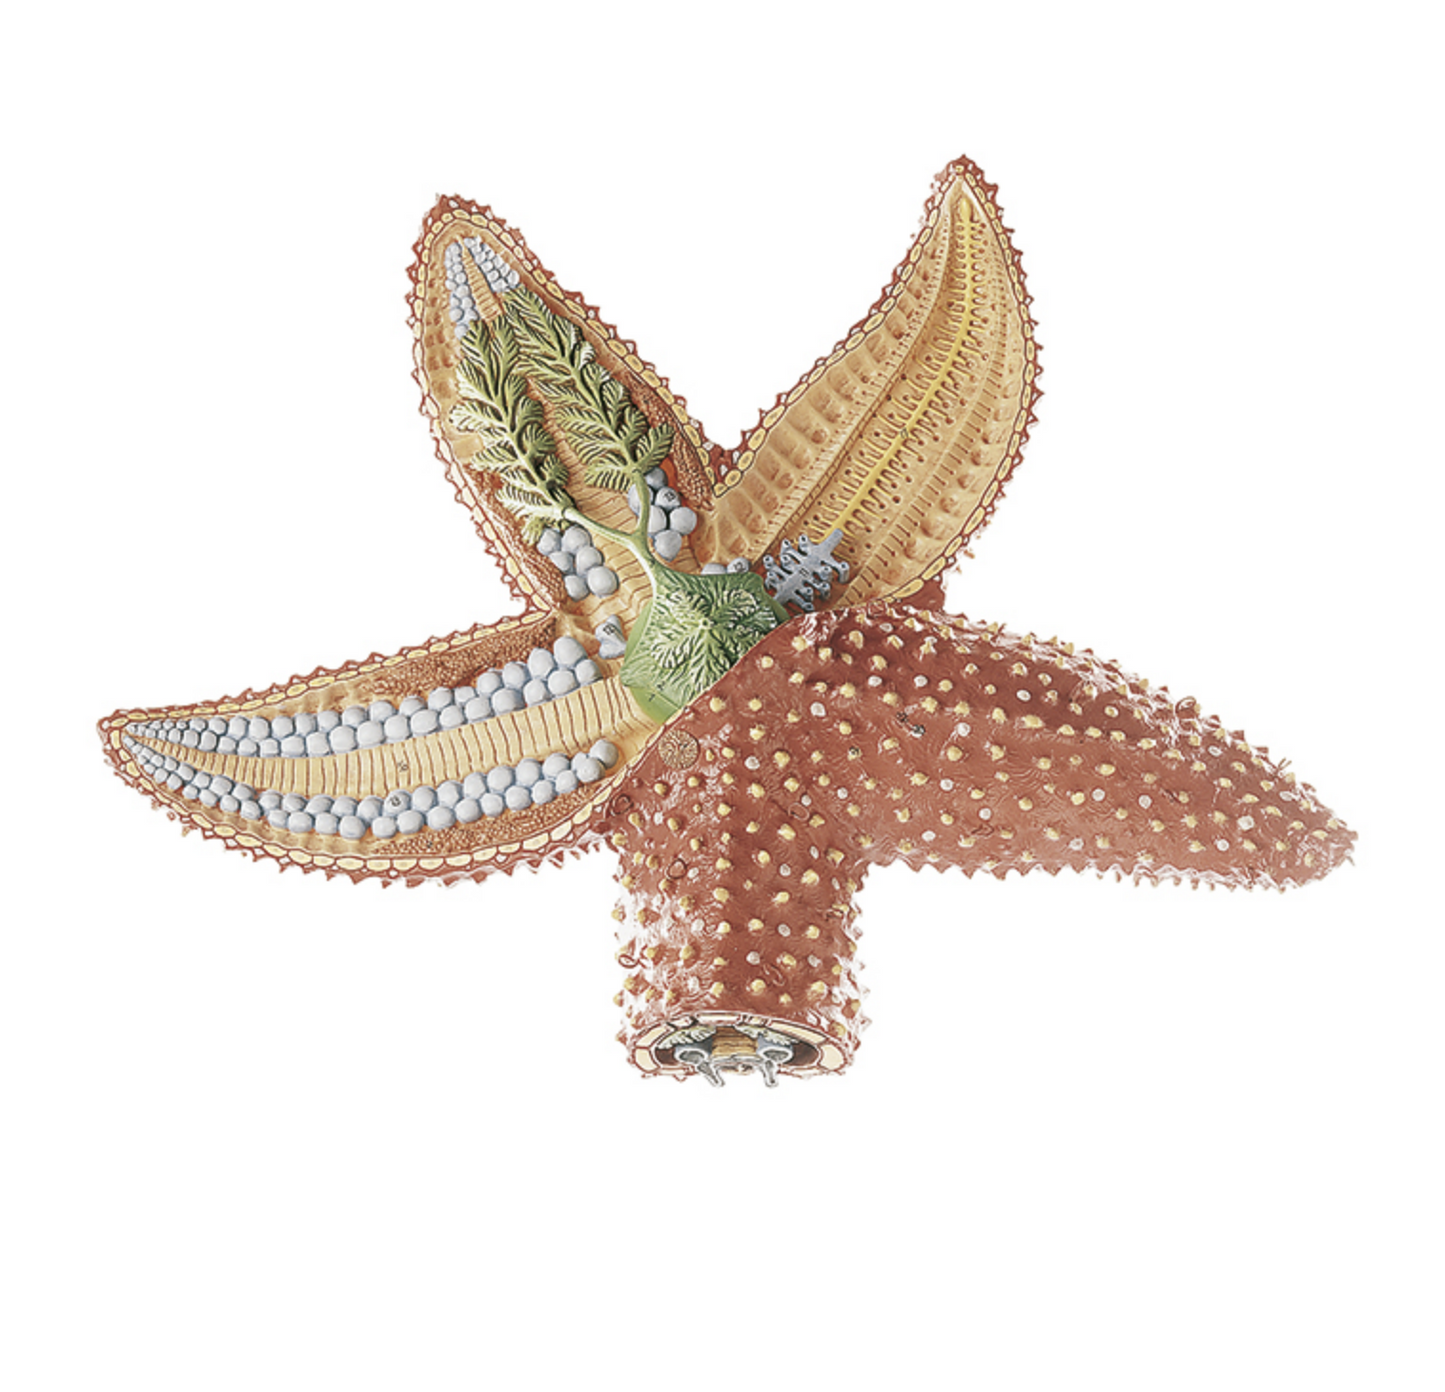 Model of a starfish (Asterias) in the highest quality and enlarged